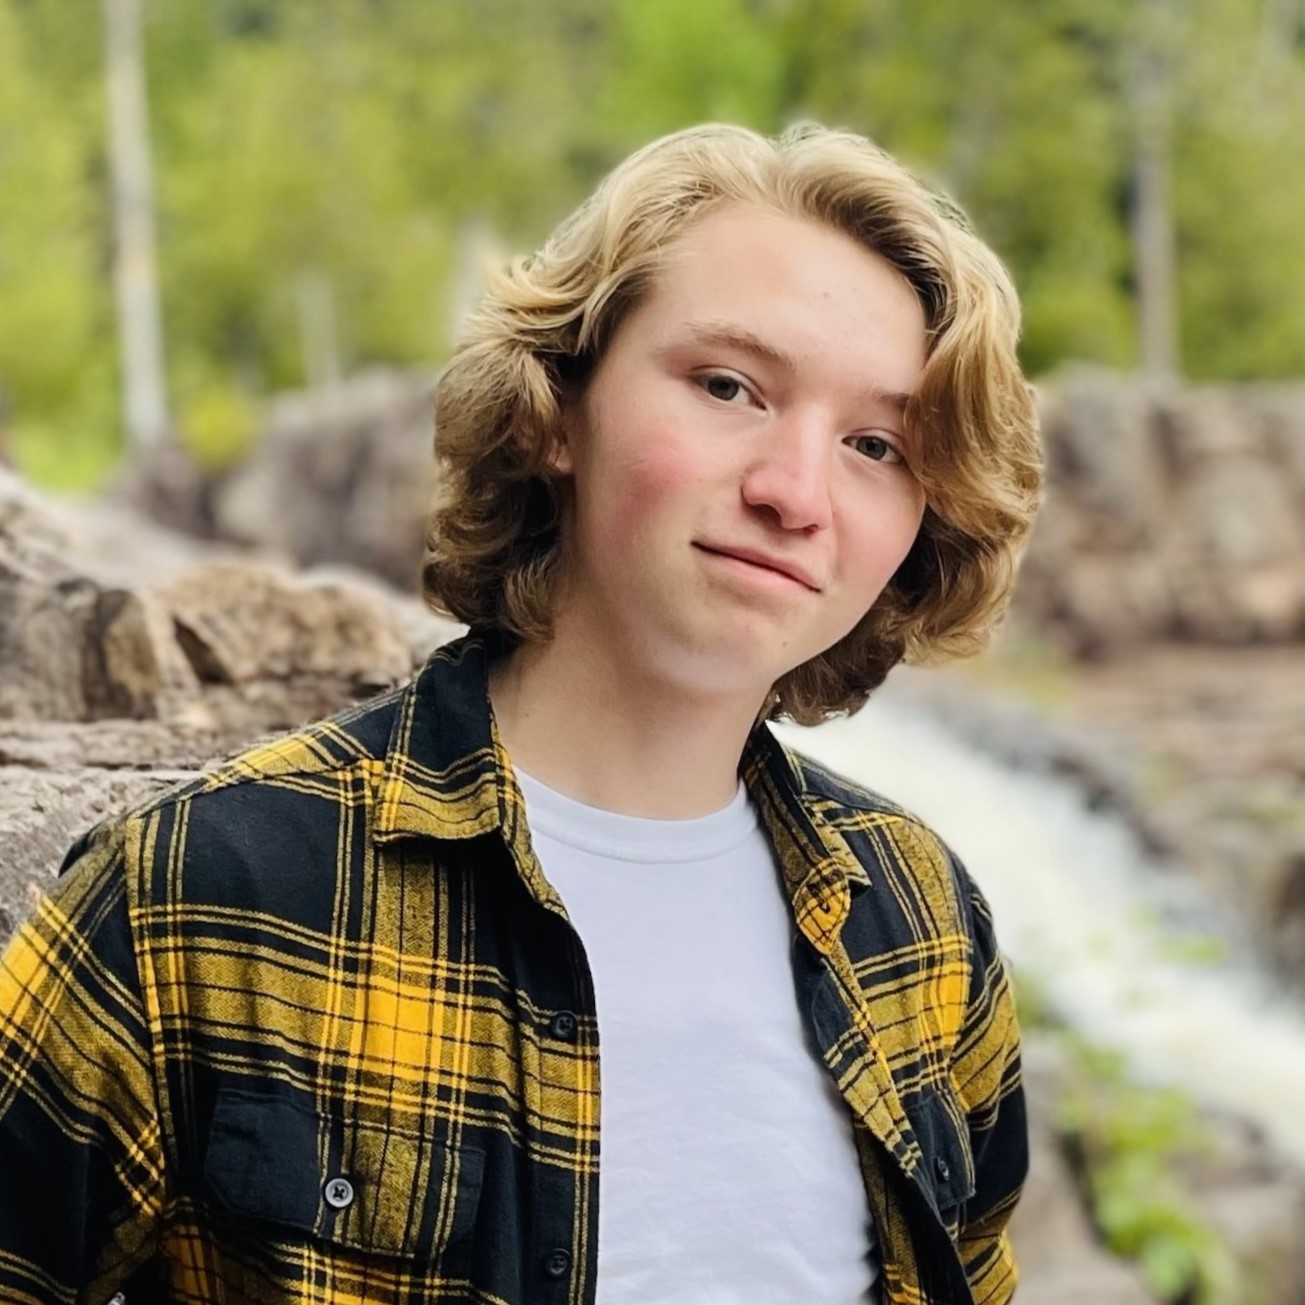 A young man in front of a stream with curly blond hair wearing a white tee with a yellow and black plaid shirt on top